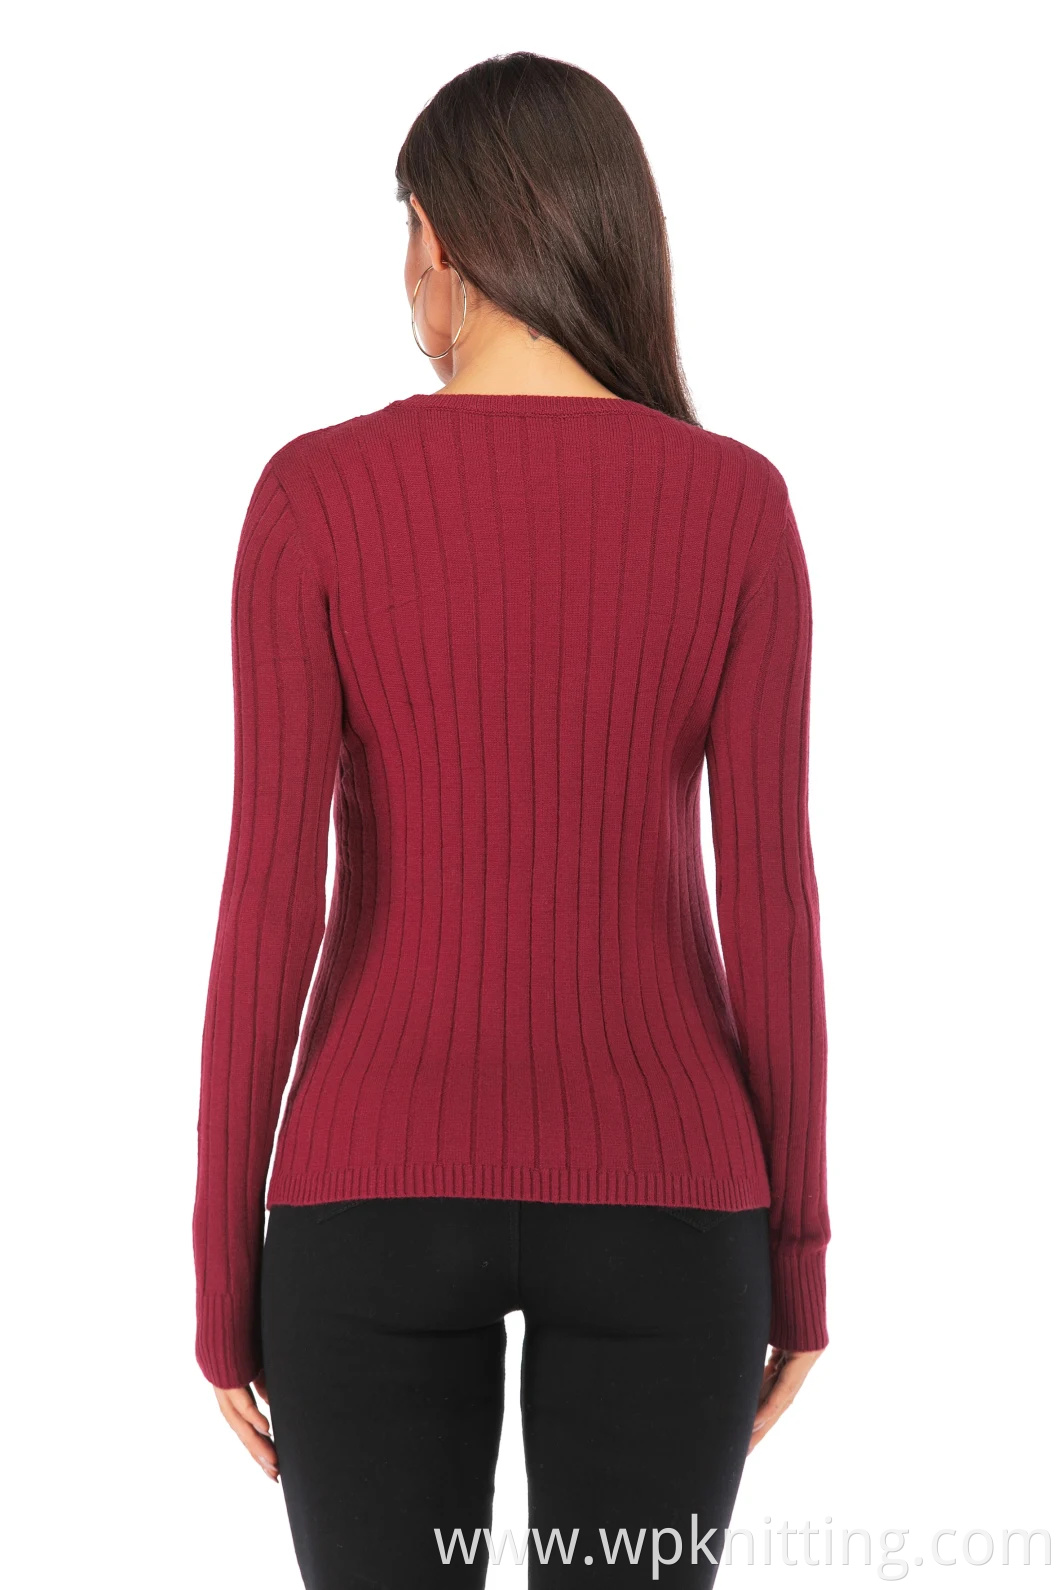 Pullover Knitwear Bottoming Shirt Long Sleeves Apparel Fashion Sweater